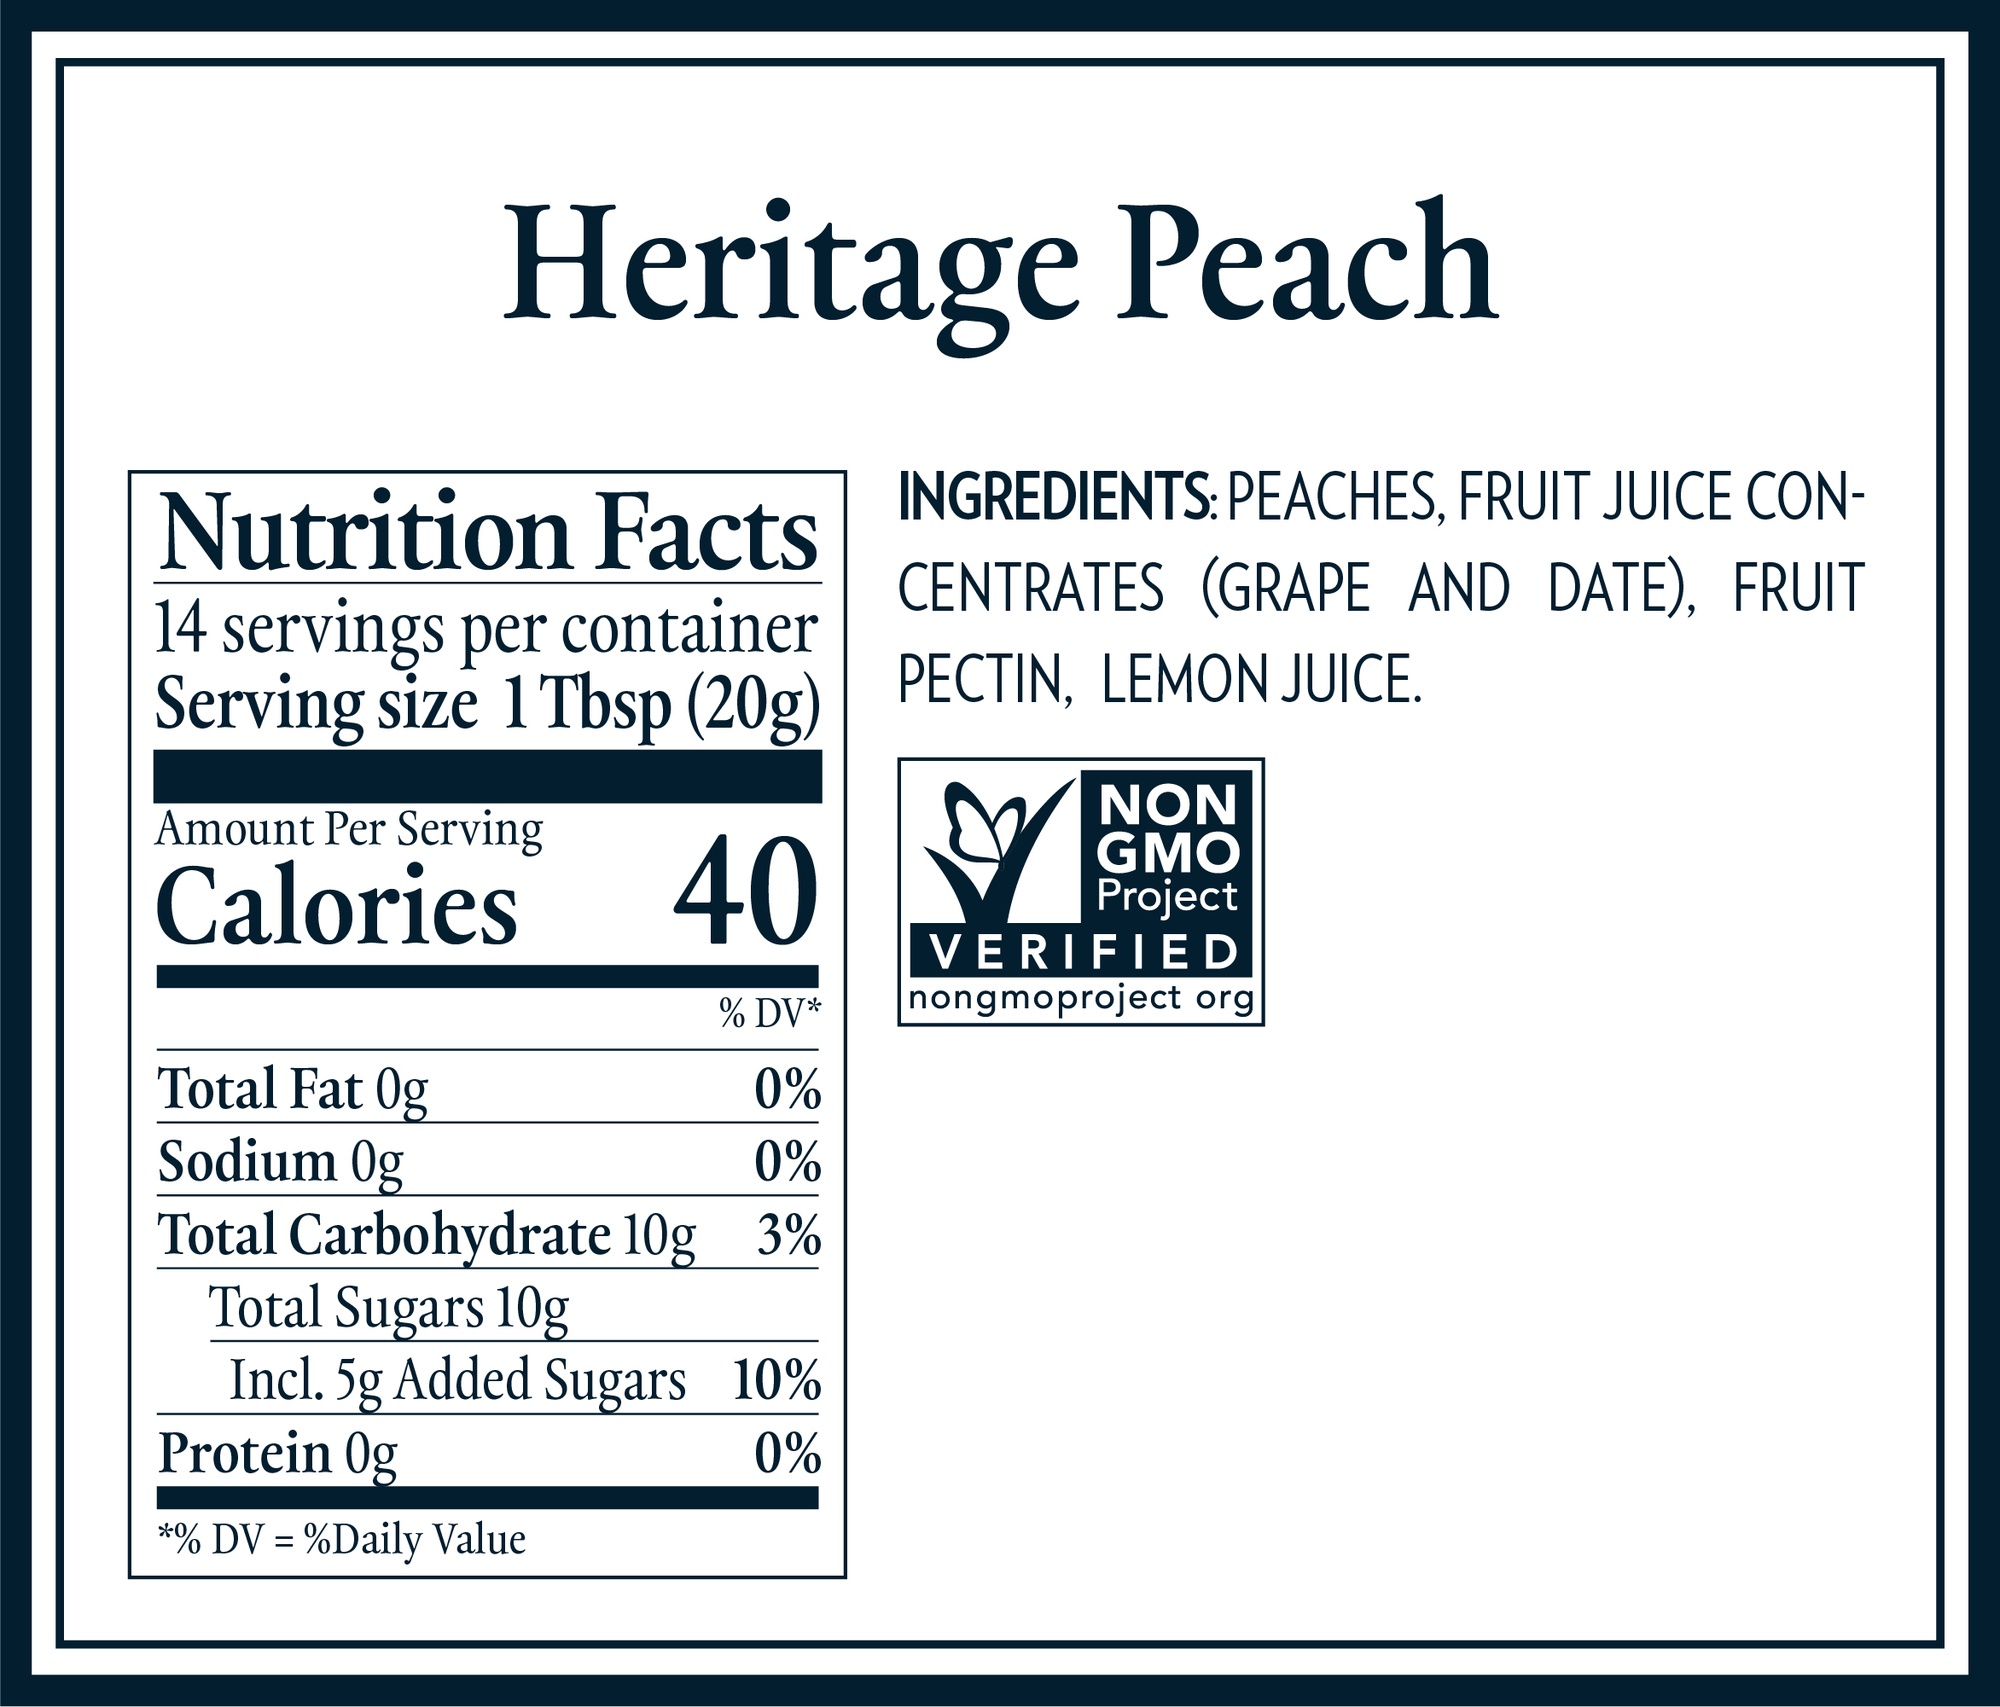 Nutrition Tables & Ingredients 2_heritage peach